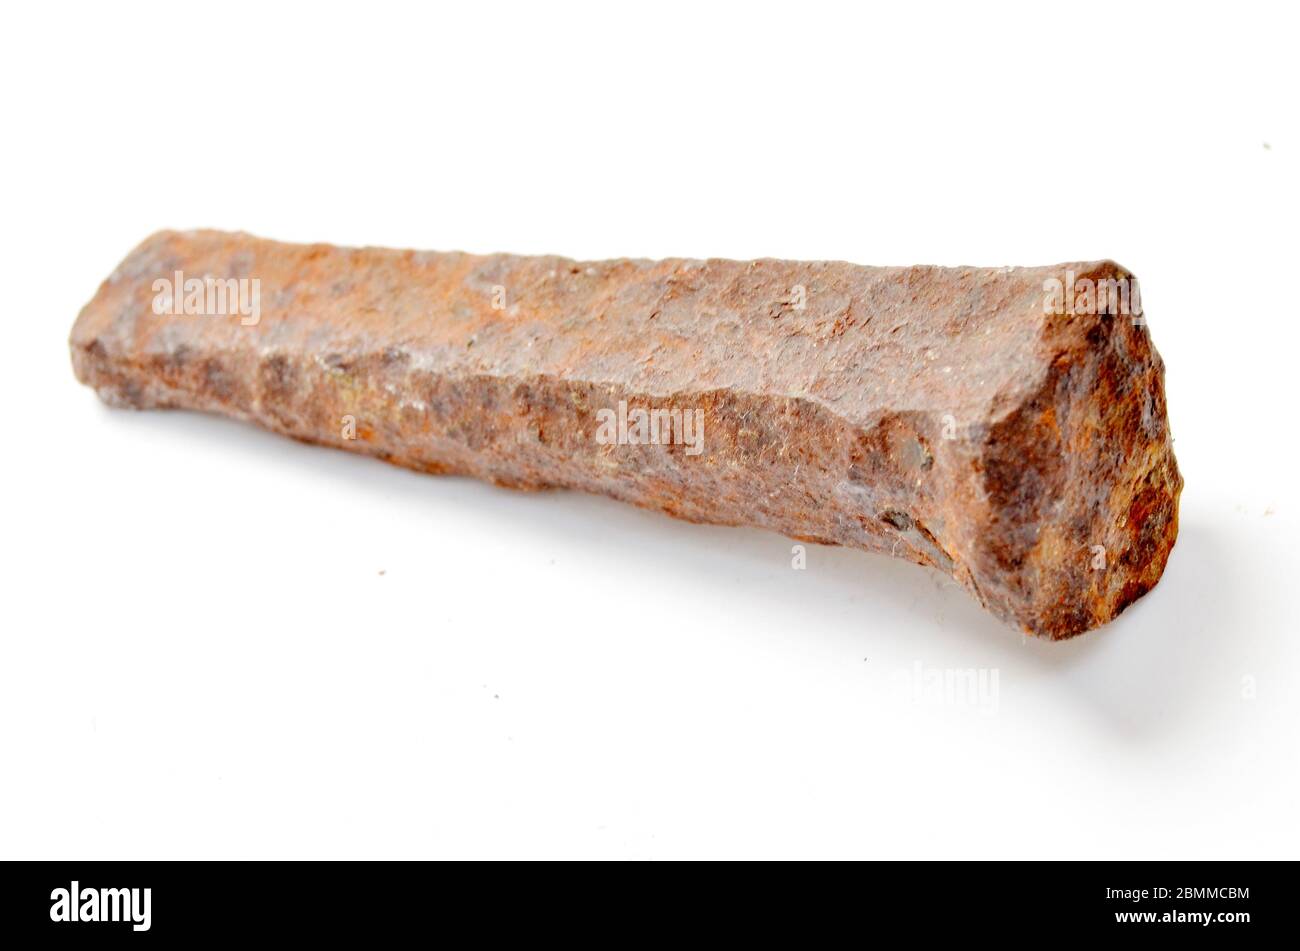 old rusty metal spike or large nail found in an old quarry Stock Photo